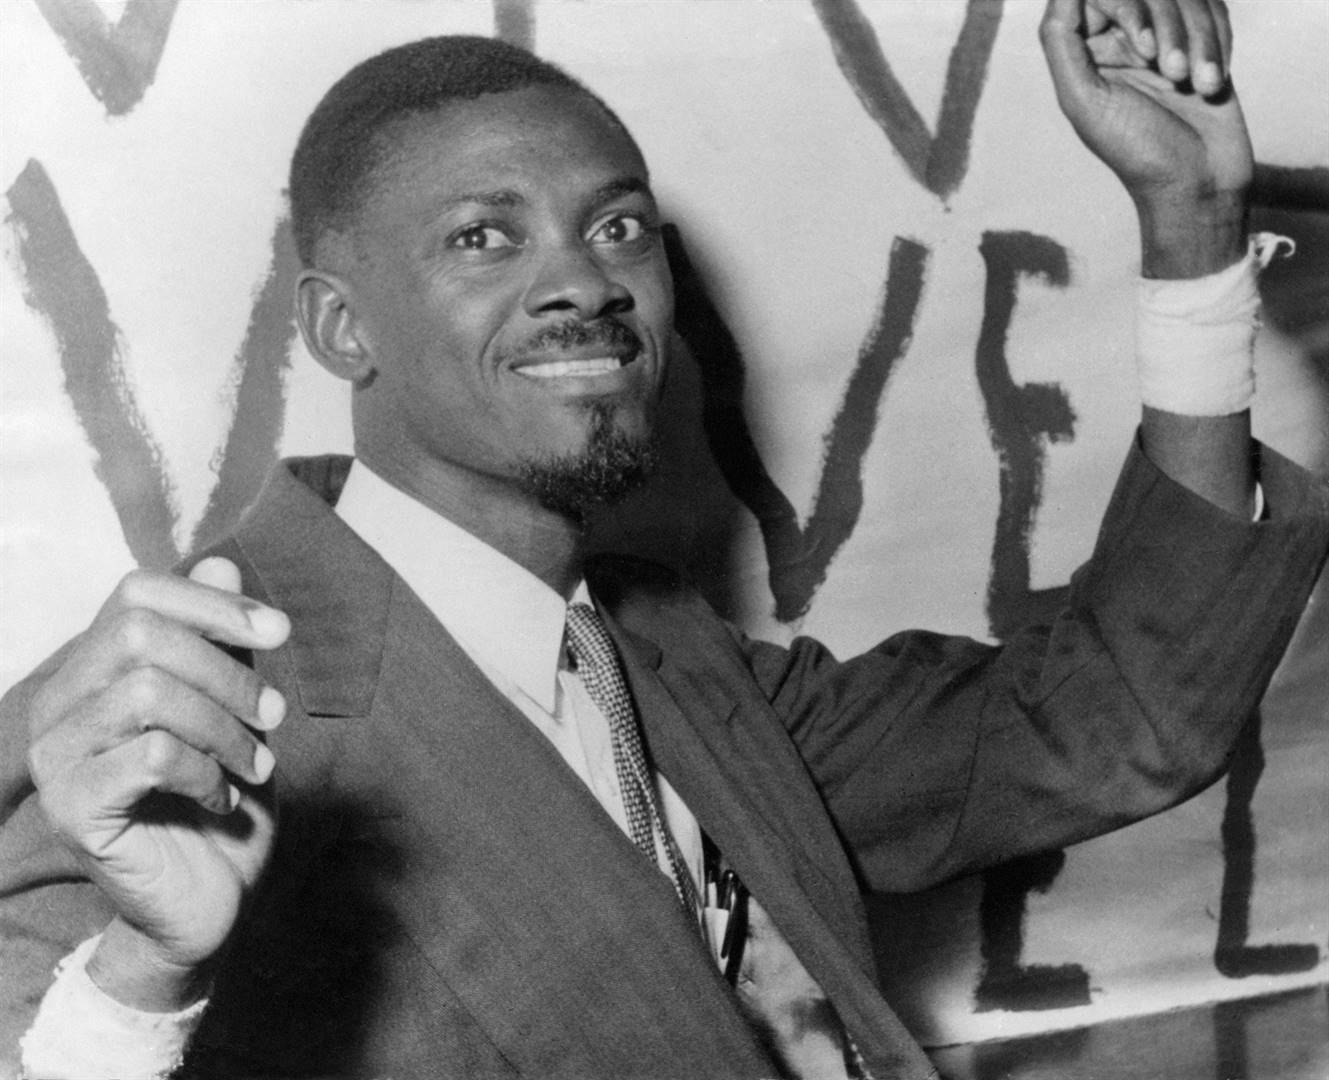 Congolese independence leader Patrice Lumumba was assassinated by firing squad on January 16 1961. Photo: Keystone / Hulton Archive / Getty Images